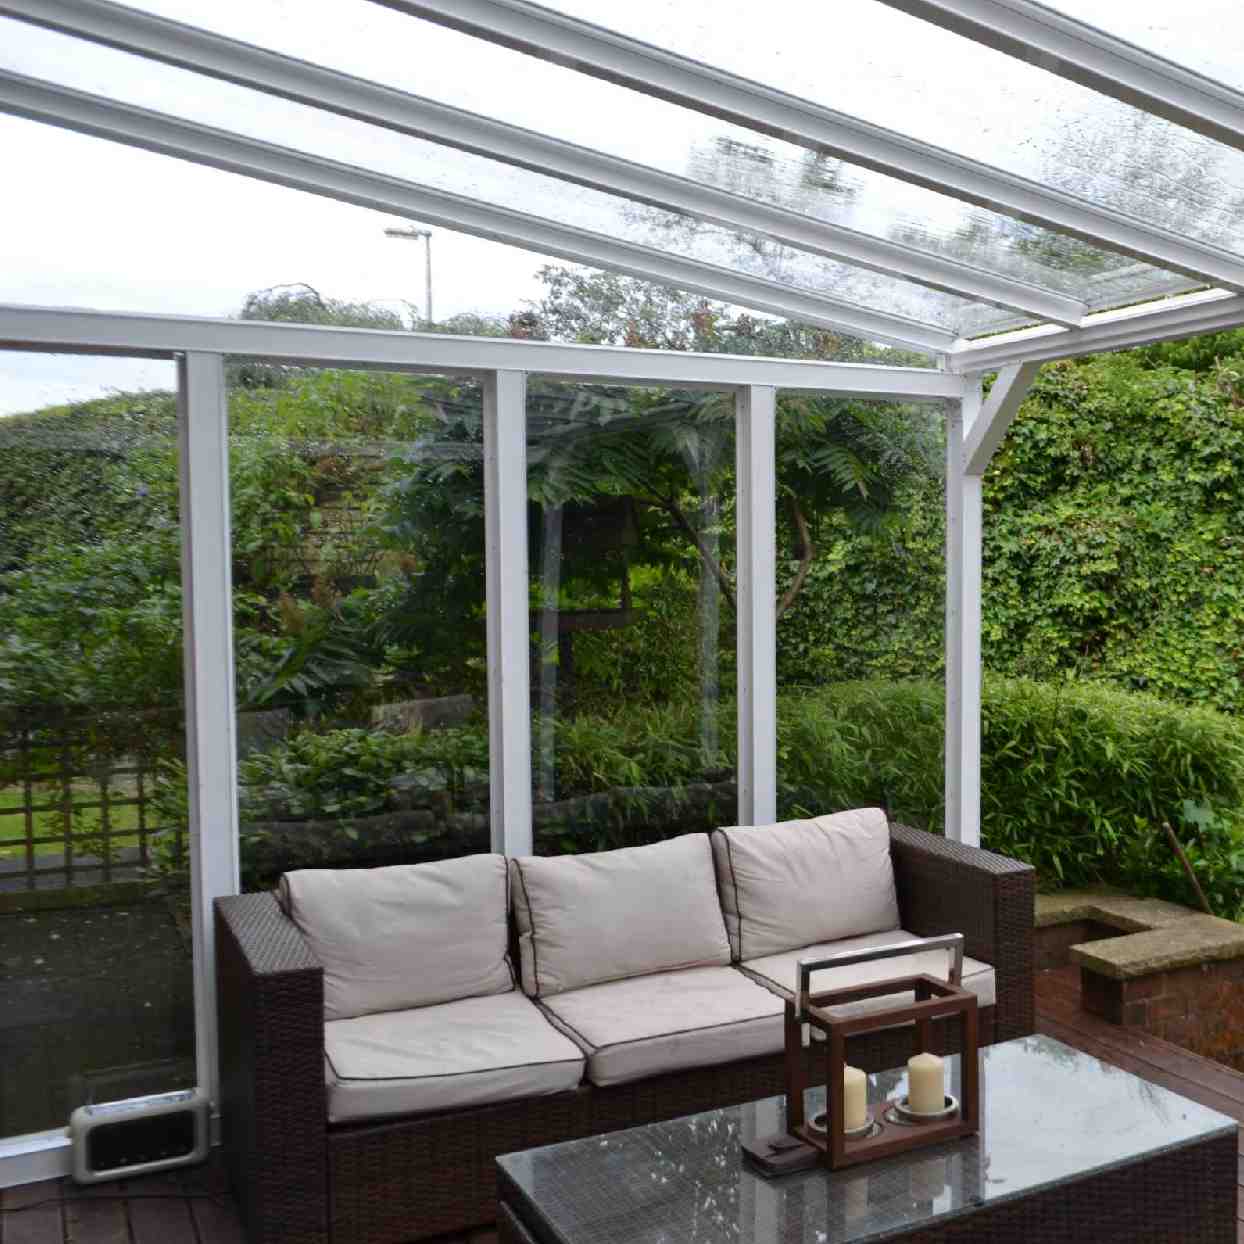 Buy Omega Verandah White with 6mm Glass Clear Plate Polycarbonate Glazing - 4.2m (W) x 2.5m (P), (3) Supporting Posts online today